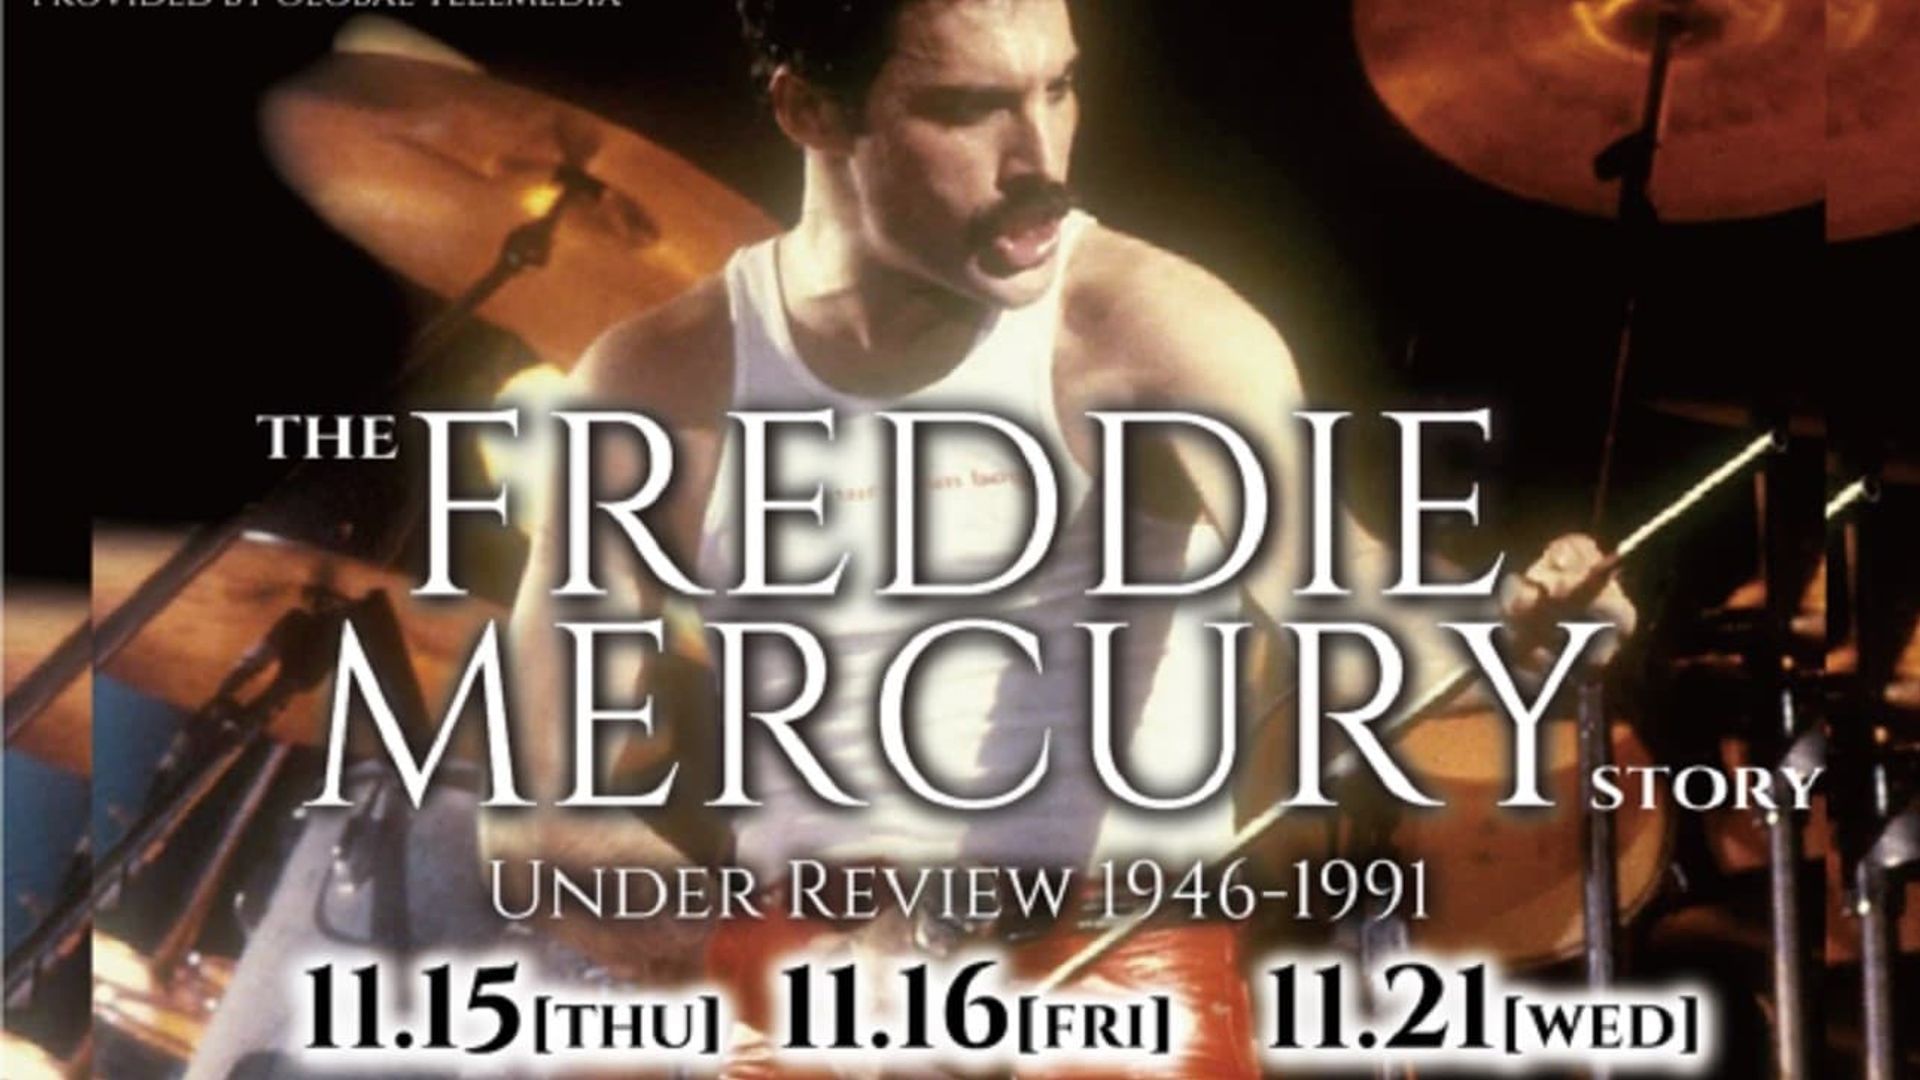 Queen: Under Review 1946-1991 - The Freddie Mercury Story background